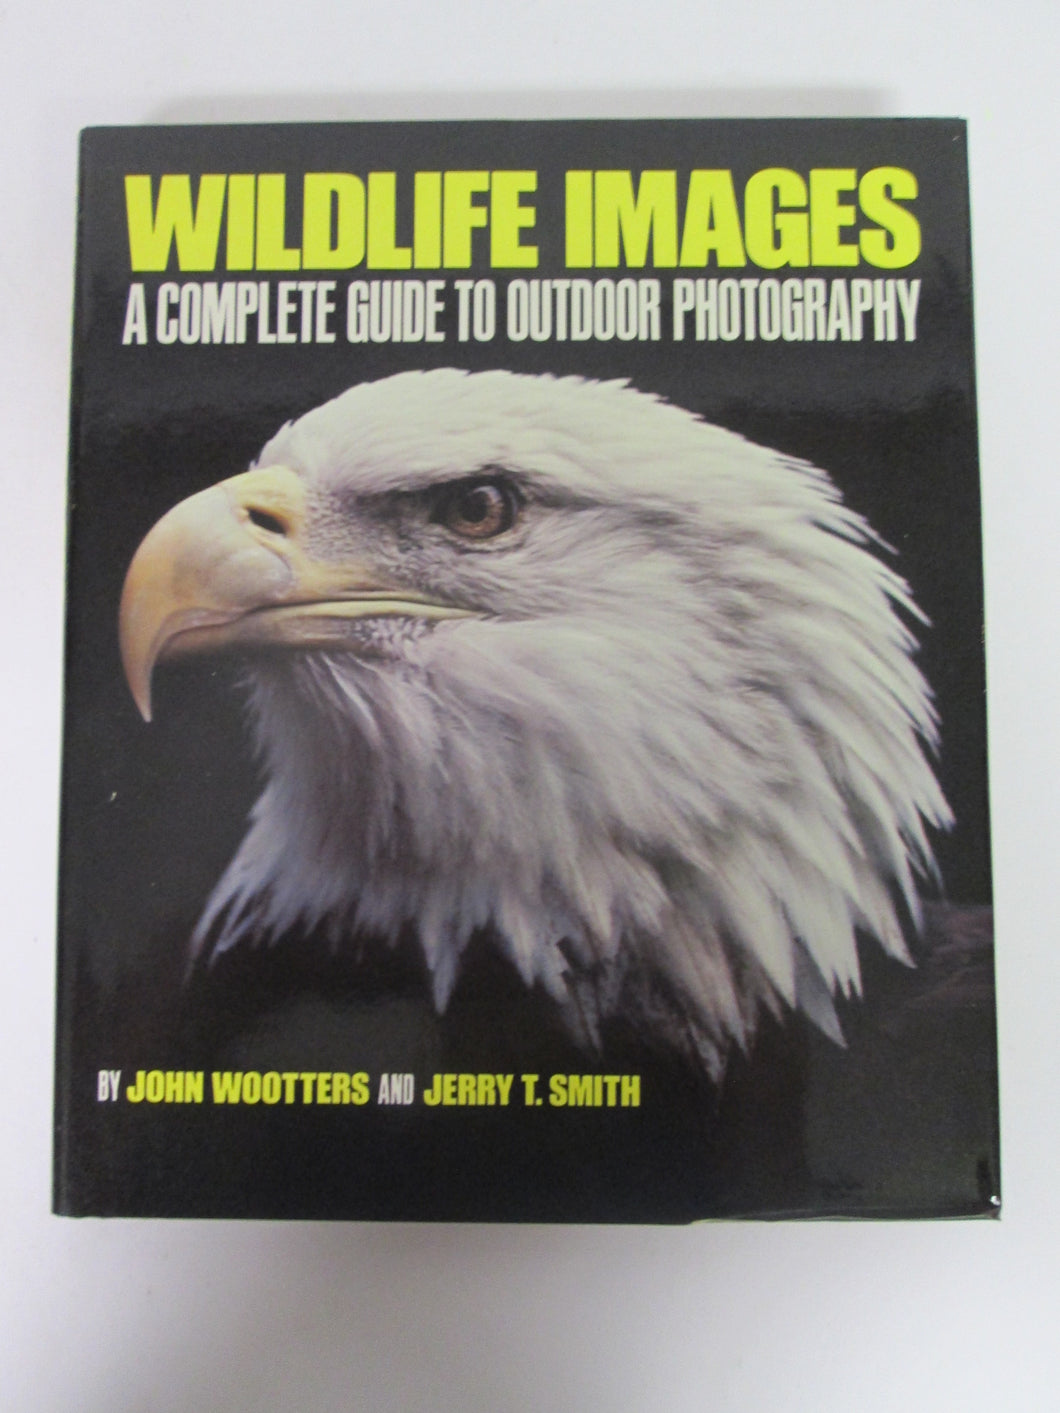 Wildlife Images by Wootters & Smith HC 1981